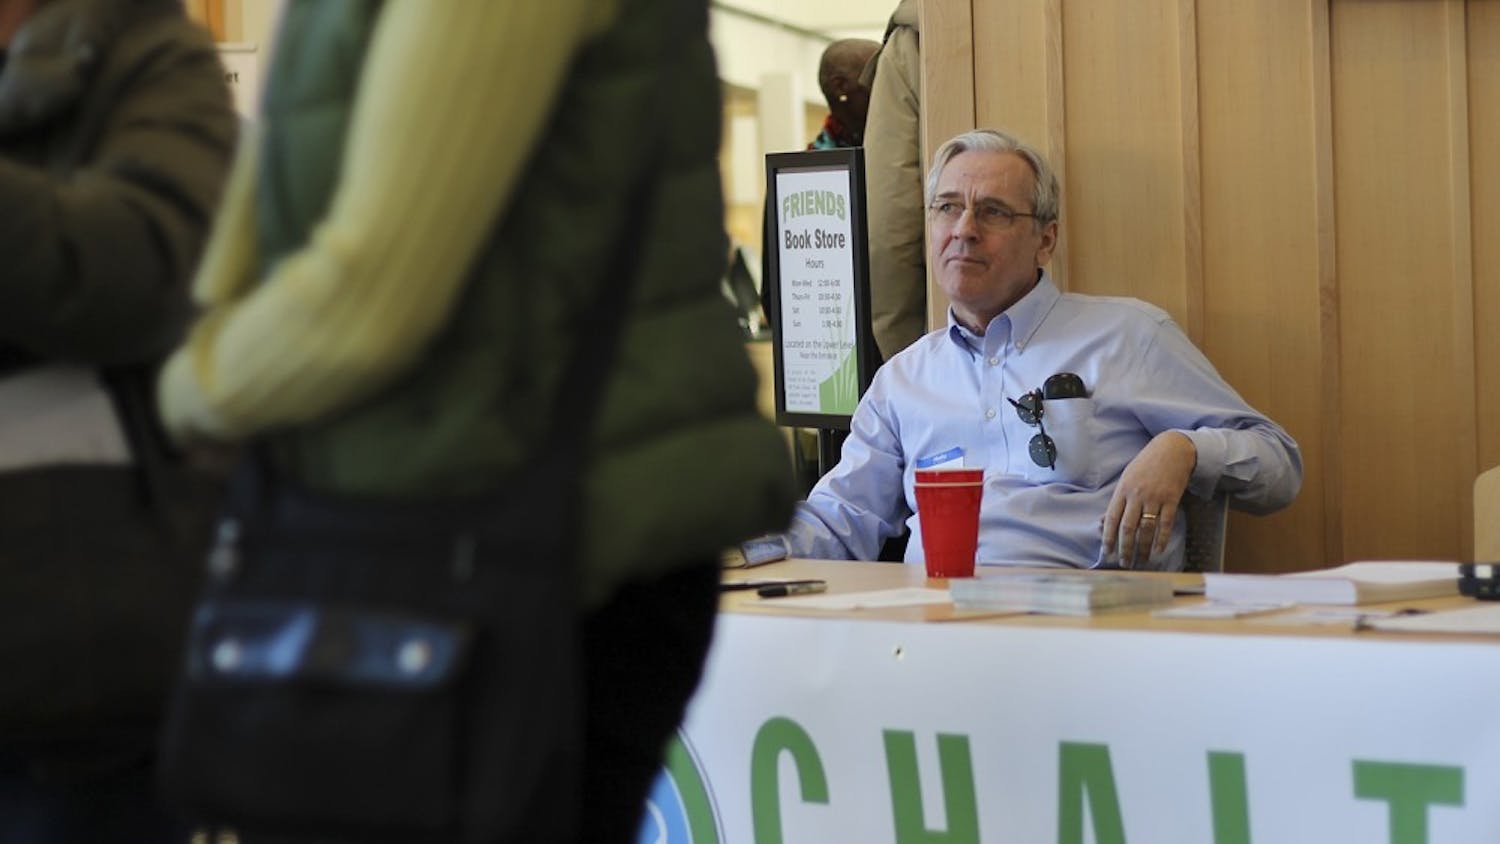 Chapel Hill Alliance for a Livable Town (CHALT) member Don Evans sits behind the organization's informational booth in CH Public Library during their public forum meeting on Sunday.